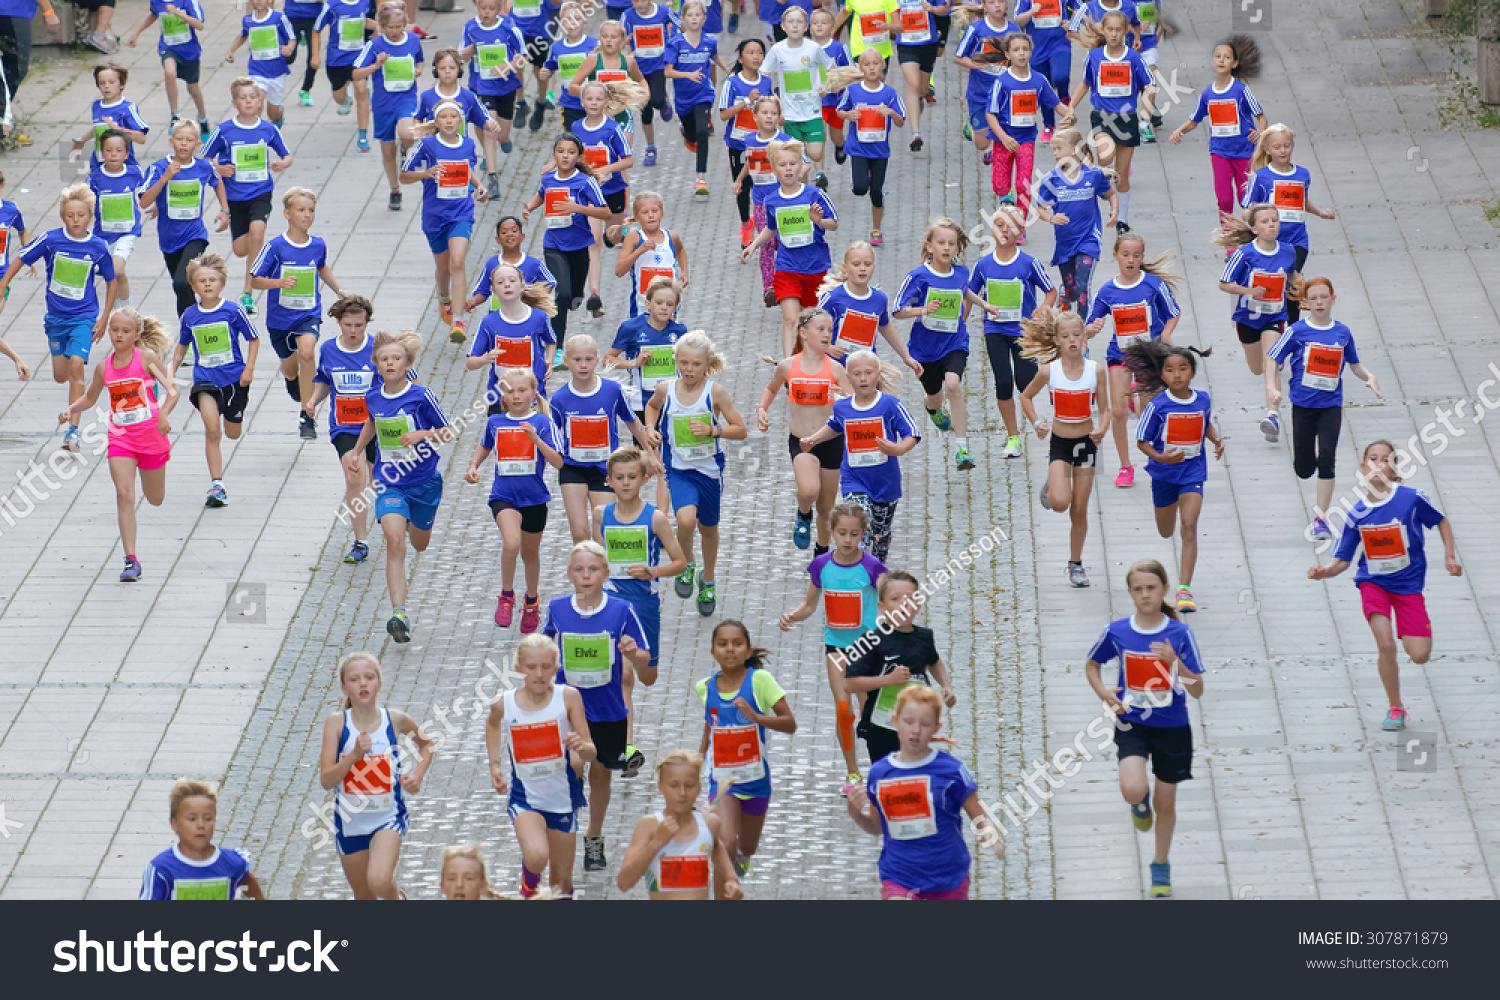 STOCKHOLM, SWEDEN - AUG 15, 2015: Large group of running girls and boys from above in the section for kids in the running event Midnattsloppet, August 15, 2015 in Stockholm, Sweden #307871879